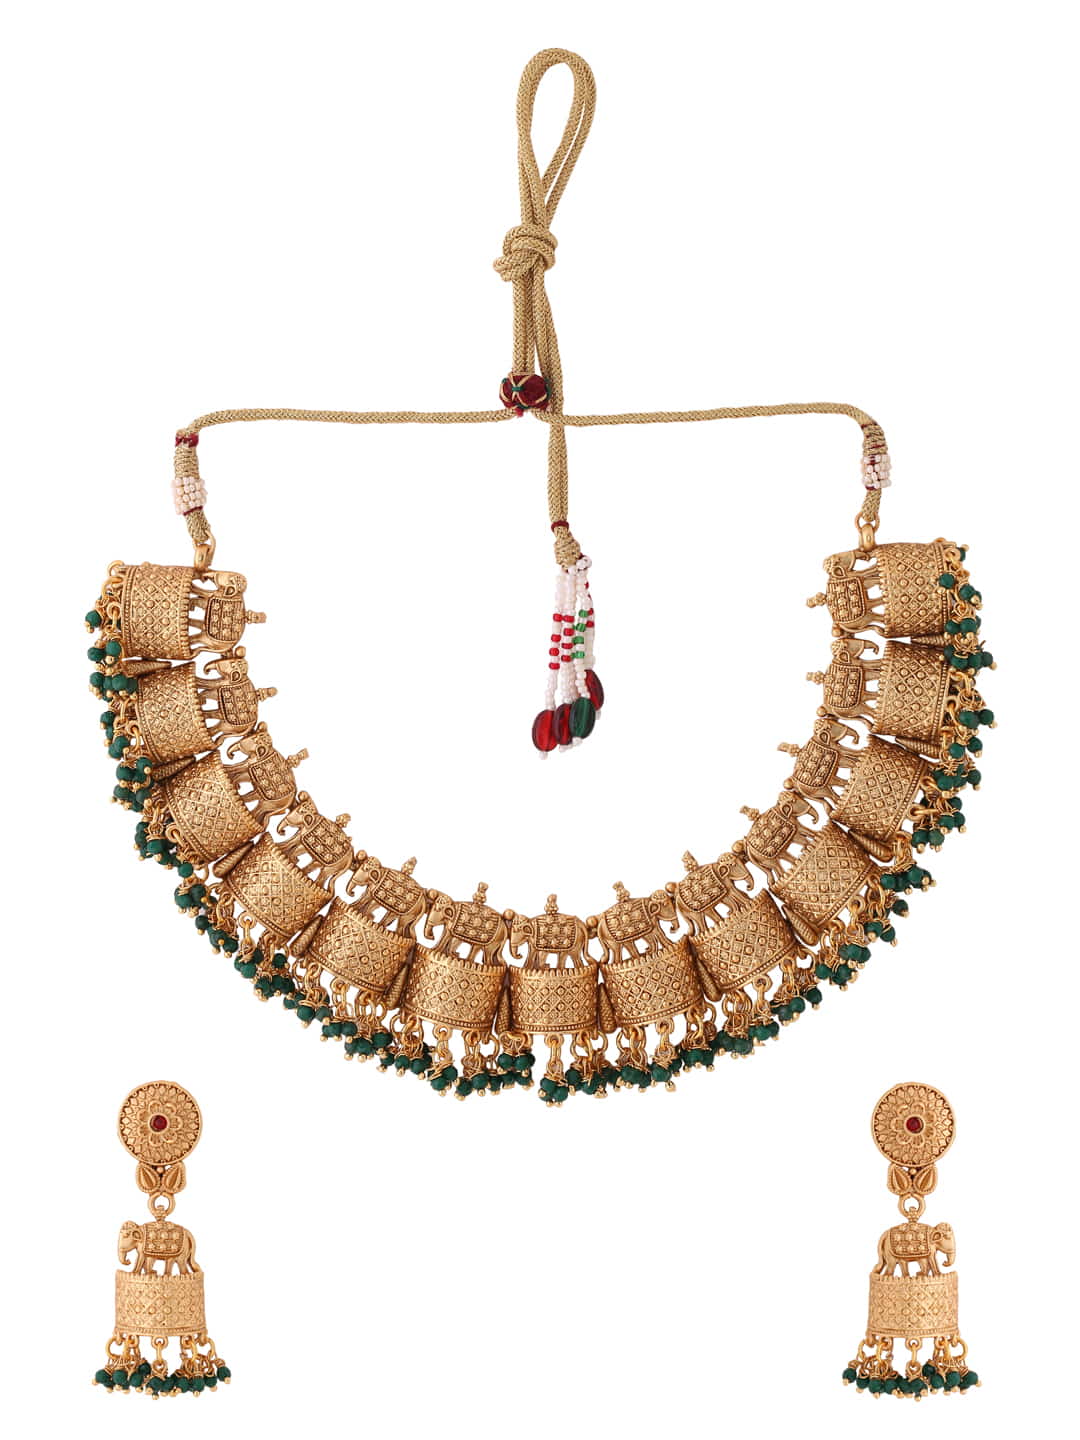 gold-plated-elephant-filigree-with-beads-handcrafted-necklace-set-viraasi